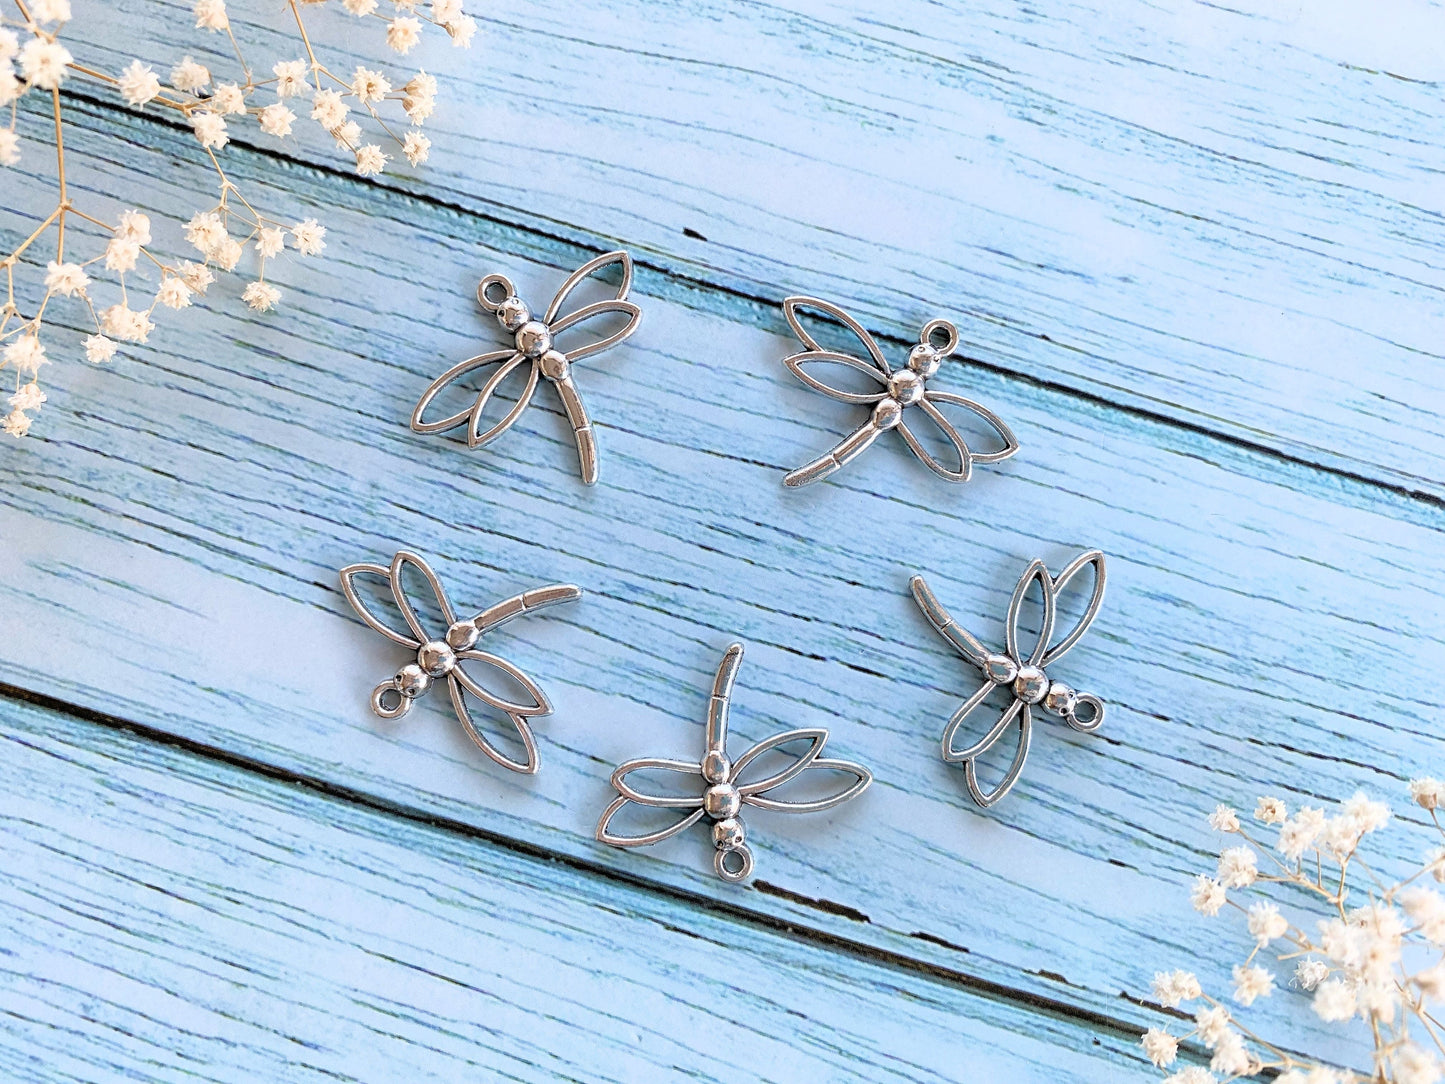 Charm Pendant 4pcs Silver Dragonfly Charms Jewelry Parts Vialysa